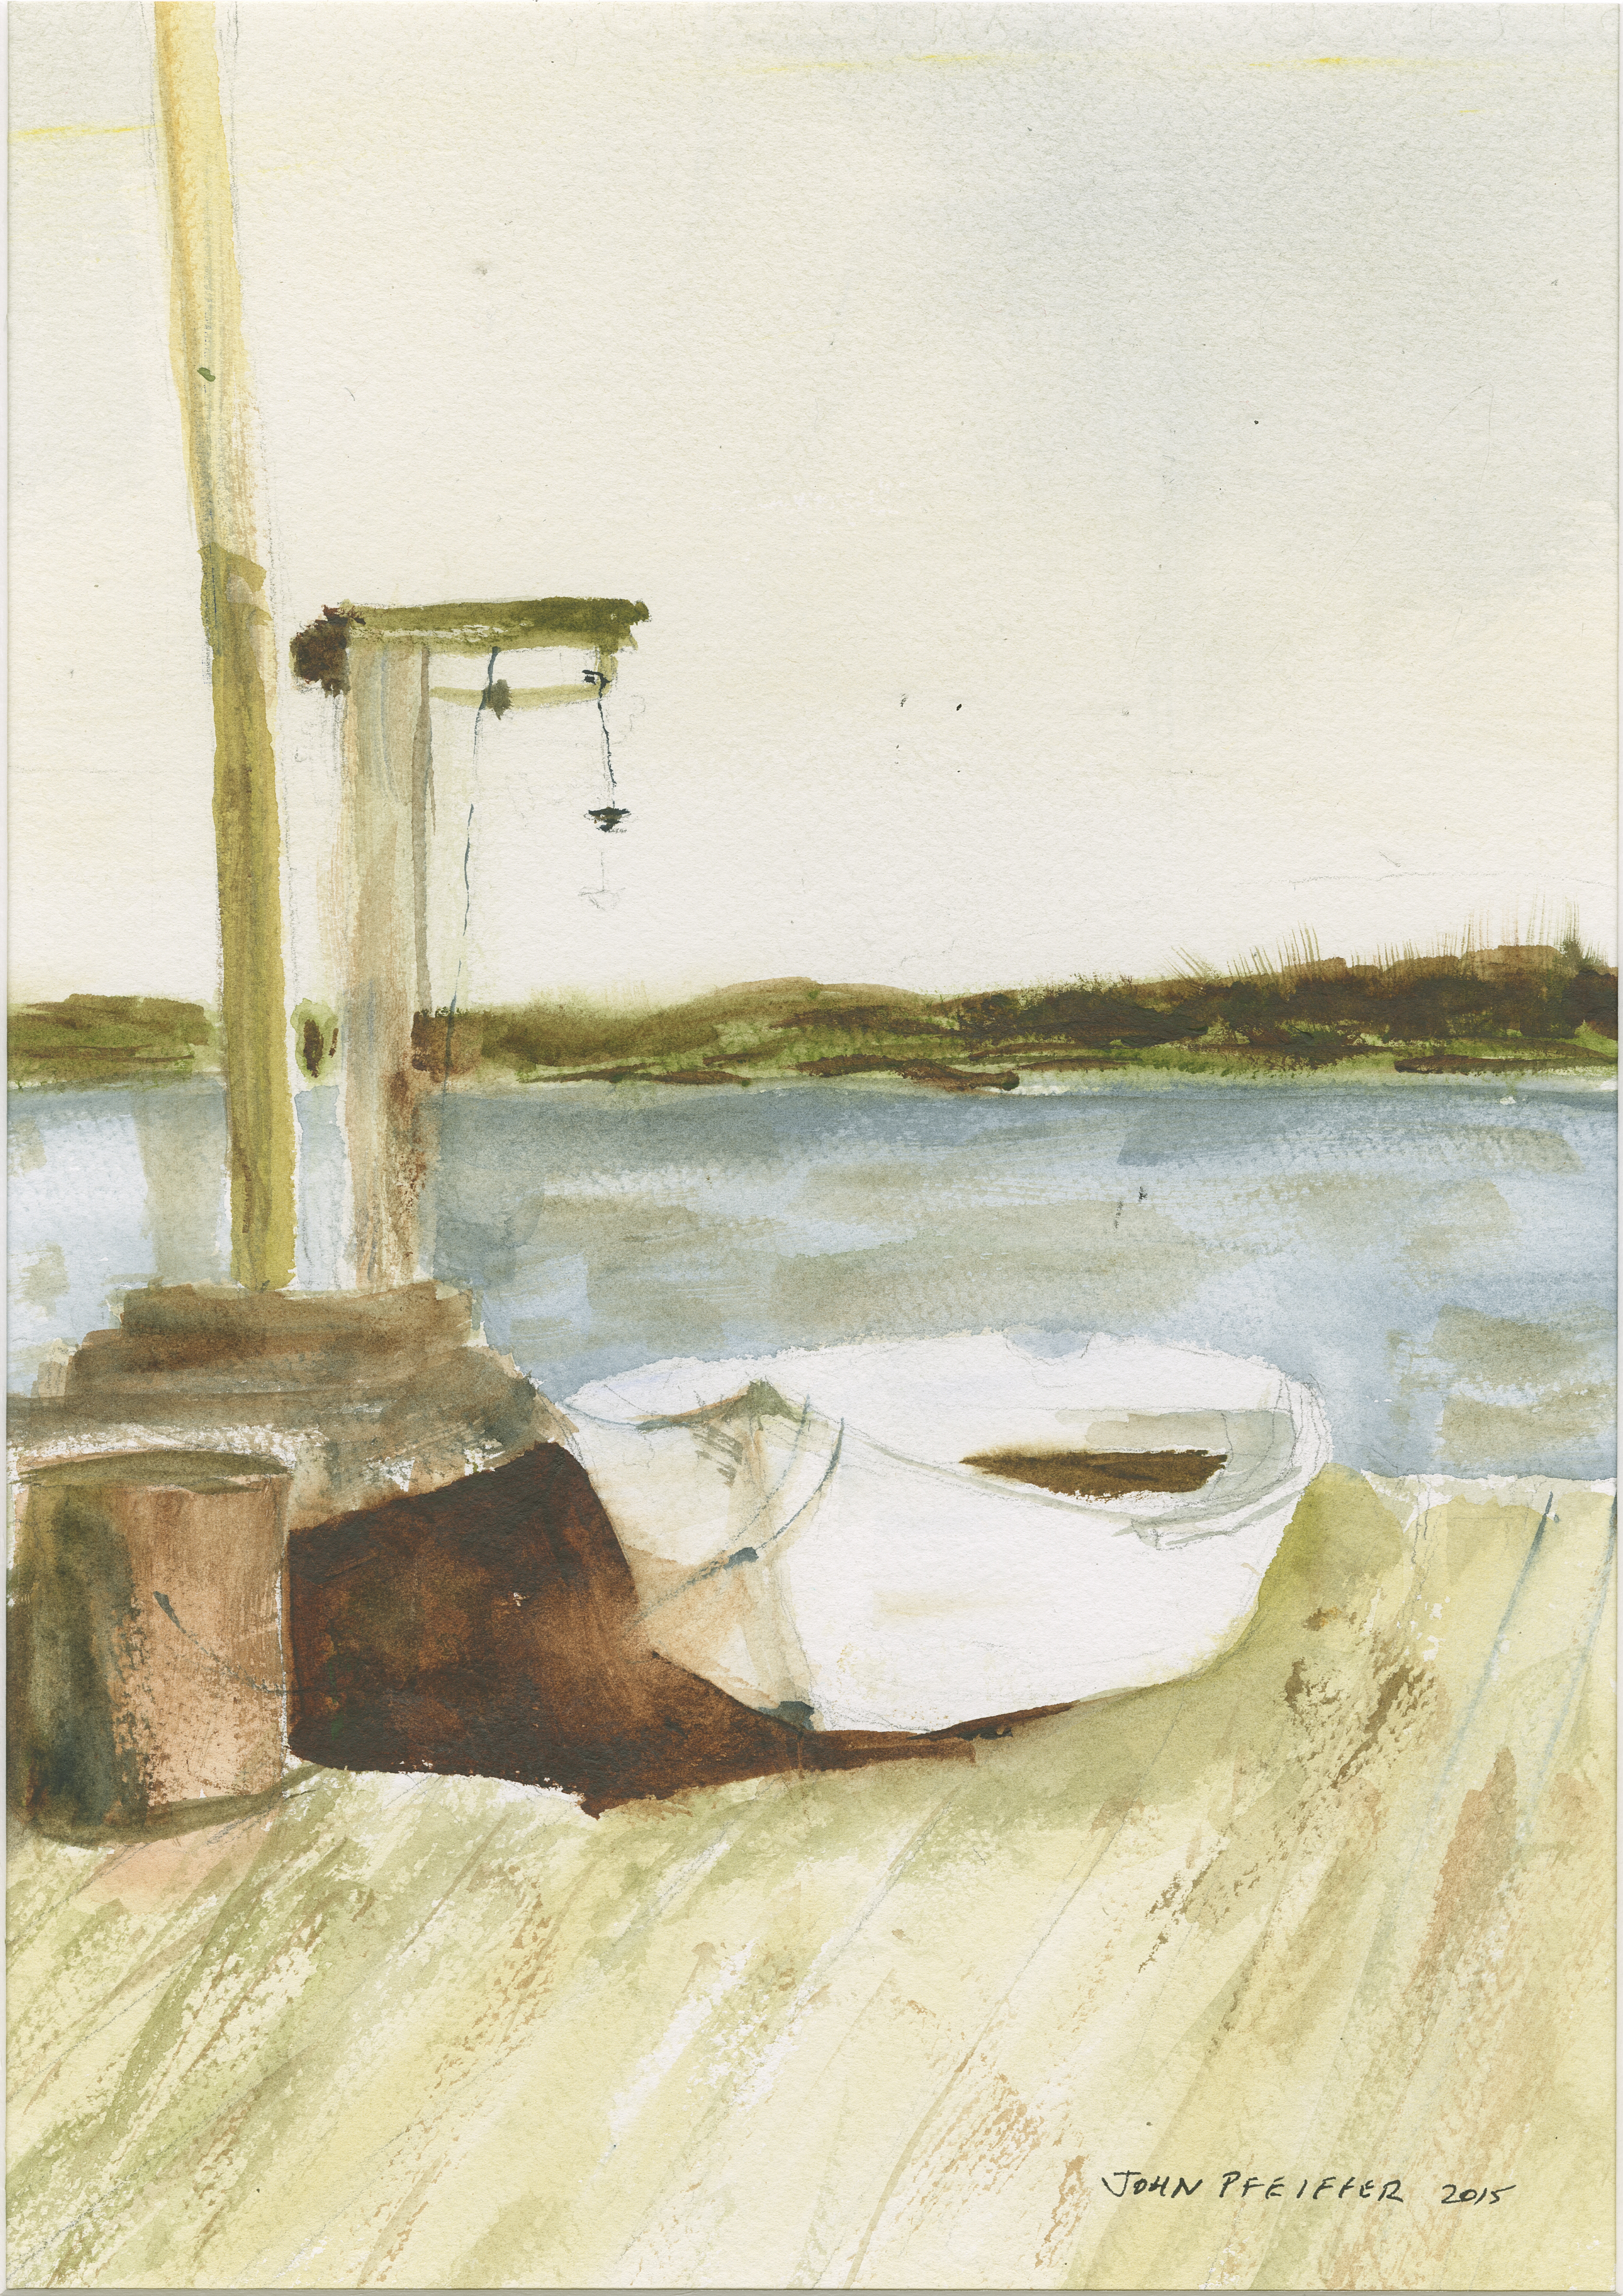 Boat Docked - after Wyeth